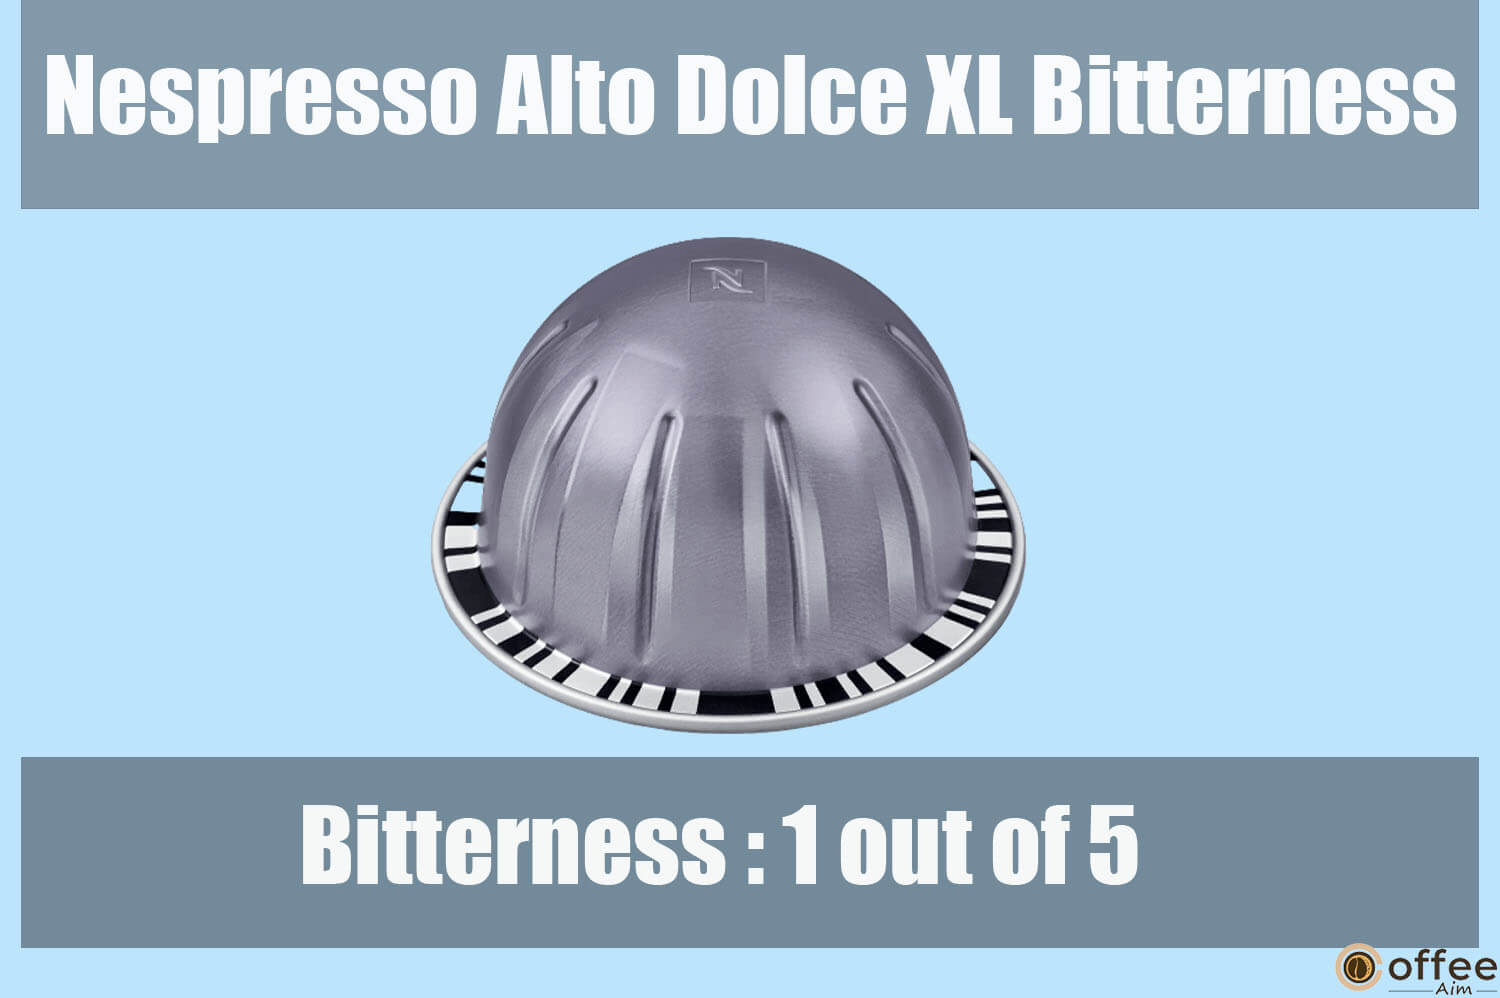 This visual depicts the 'Bitterness' of Nespresso Alto Dolce XL vertuo capsule in the article "Nespresso Alto Dolce XL Review."